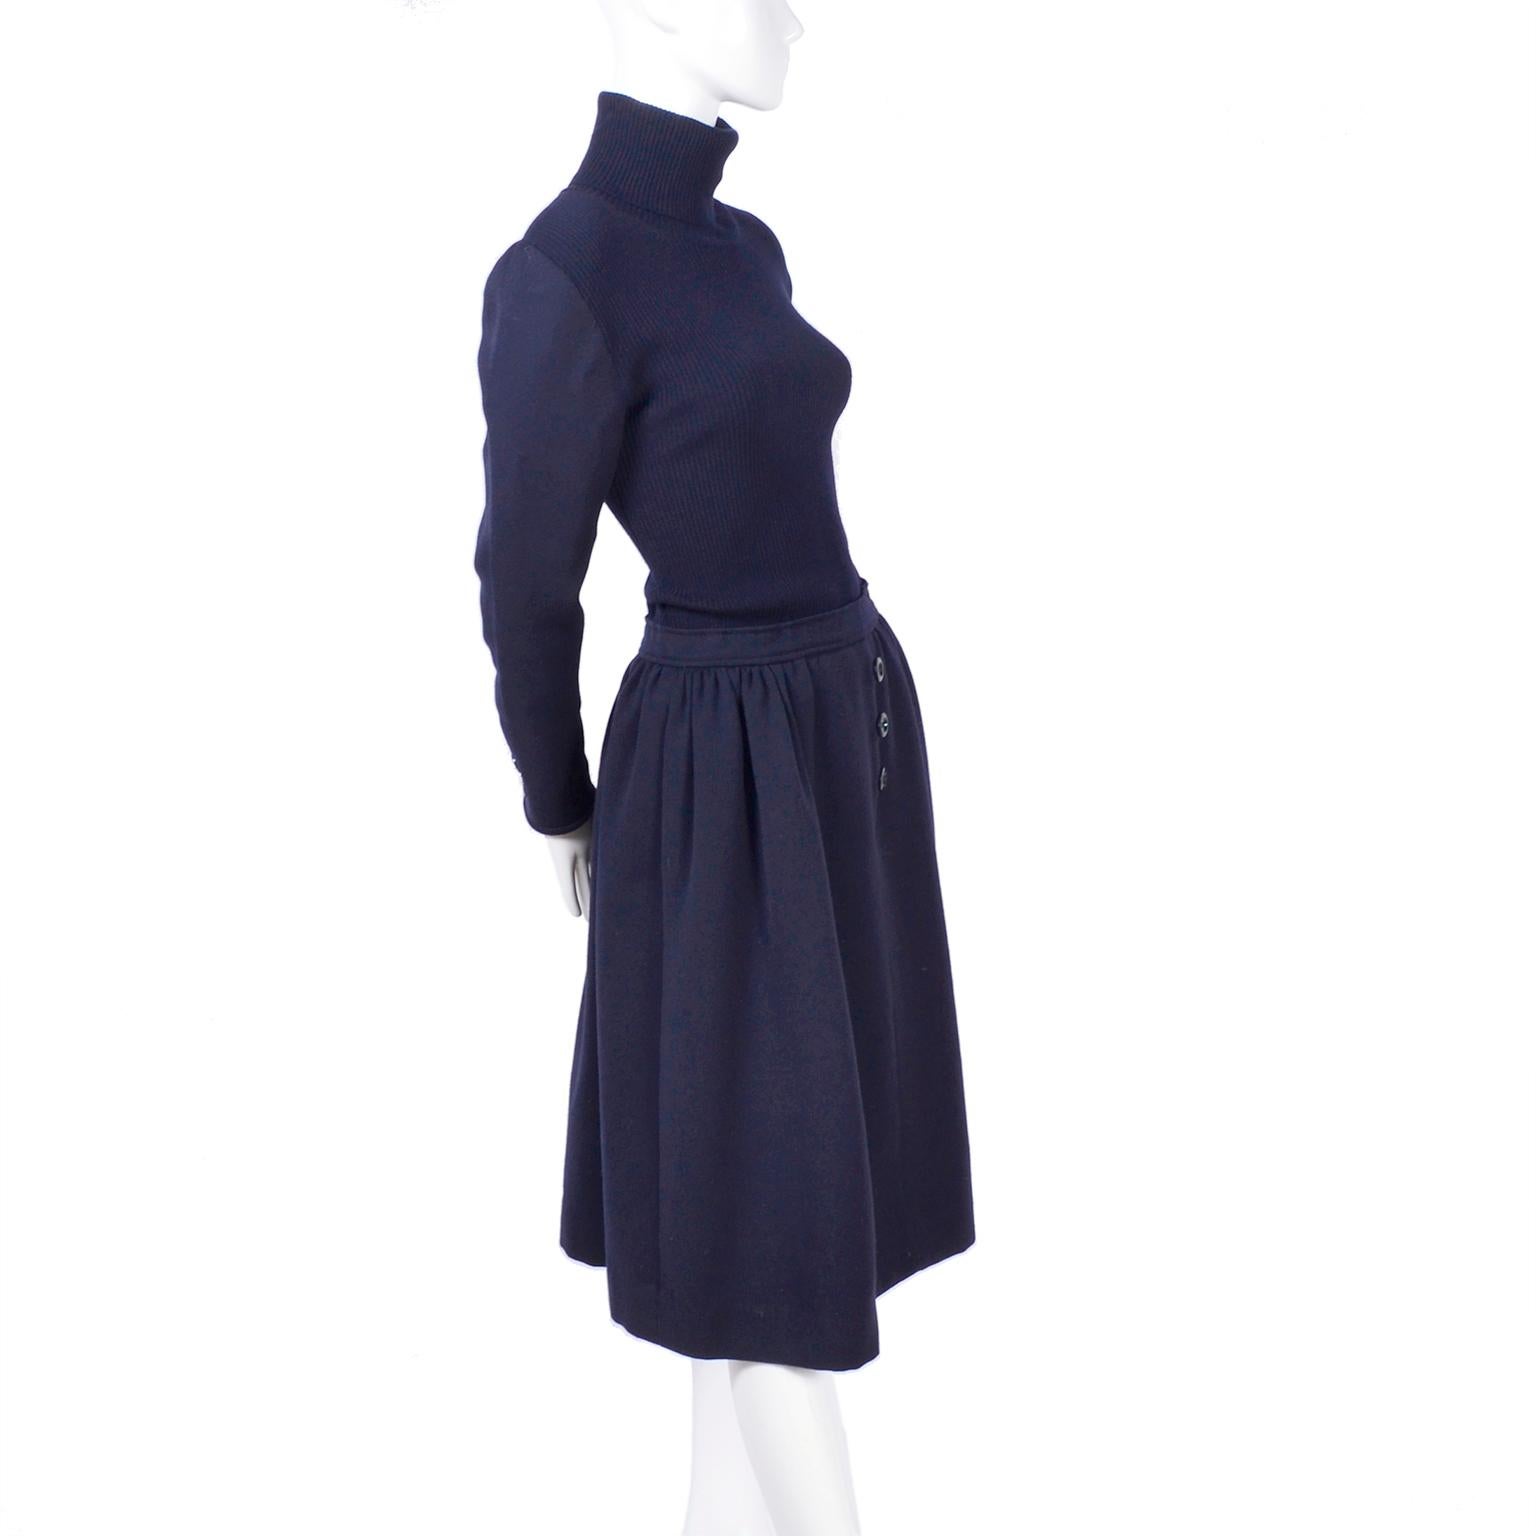 We adore this unique deep navy blue wool Valentino dress suit! This circa 1970's ensemble comes with a dress that has thick wool skirt with three decorative buttons down the front, beautiful pleats, and a waistband that make it look like a separate